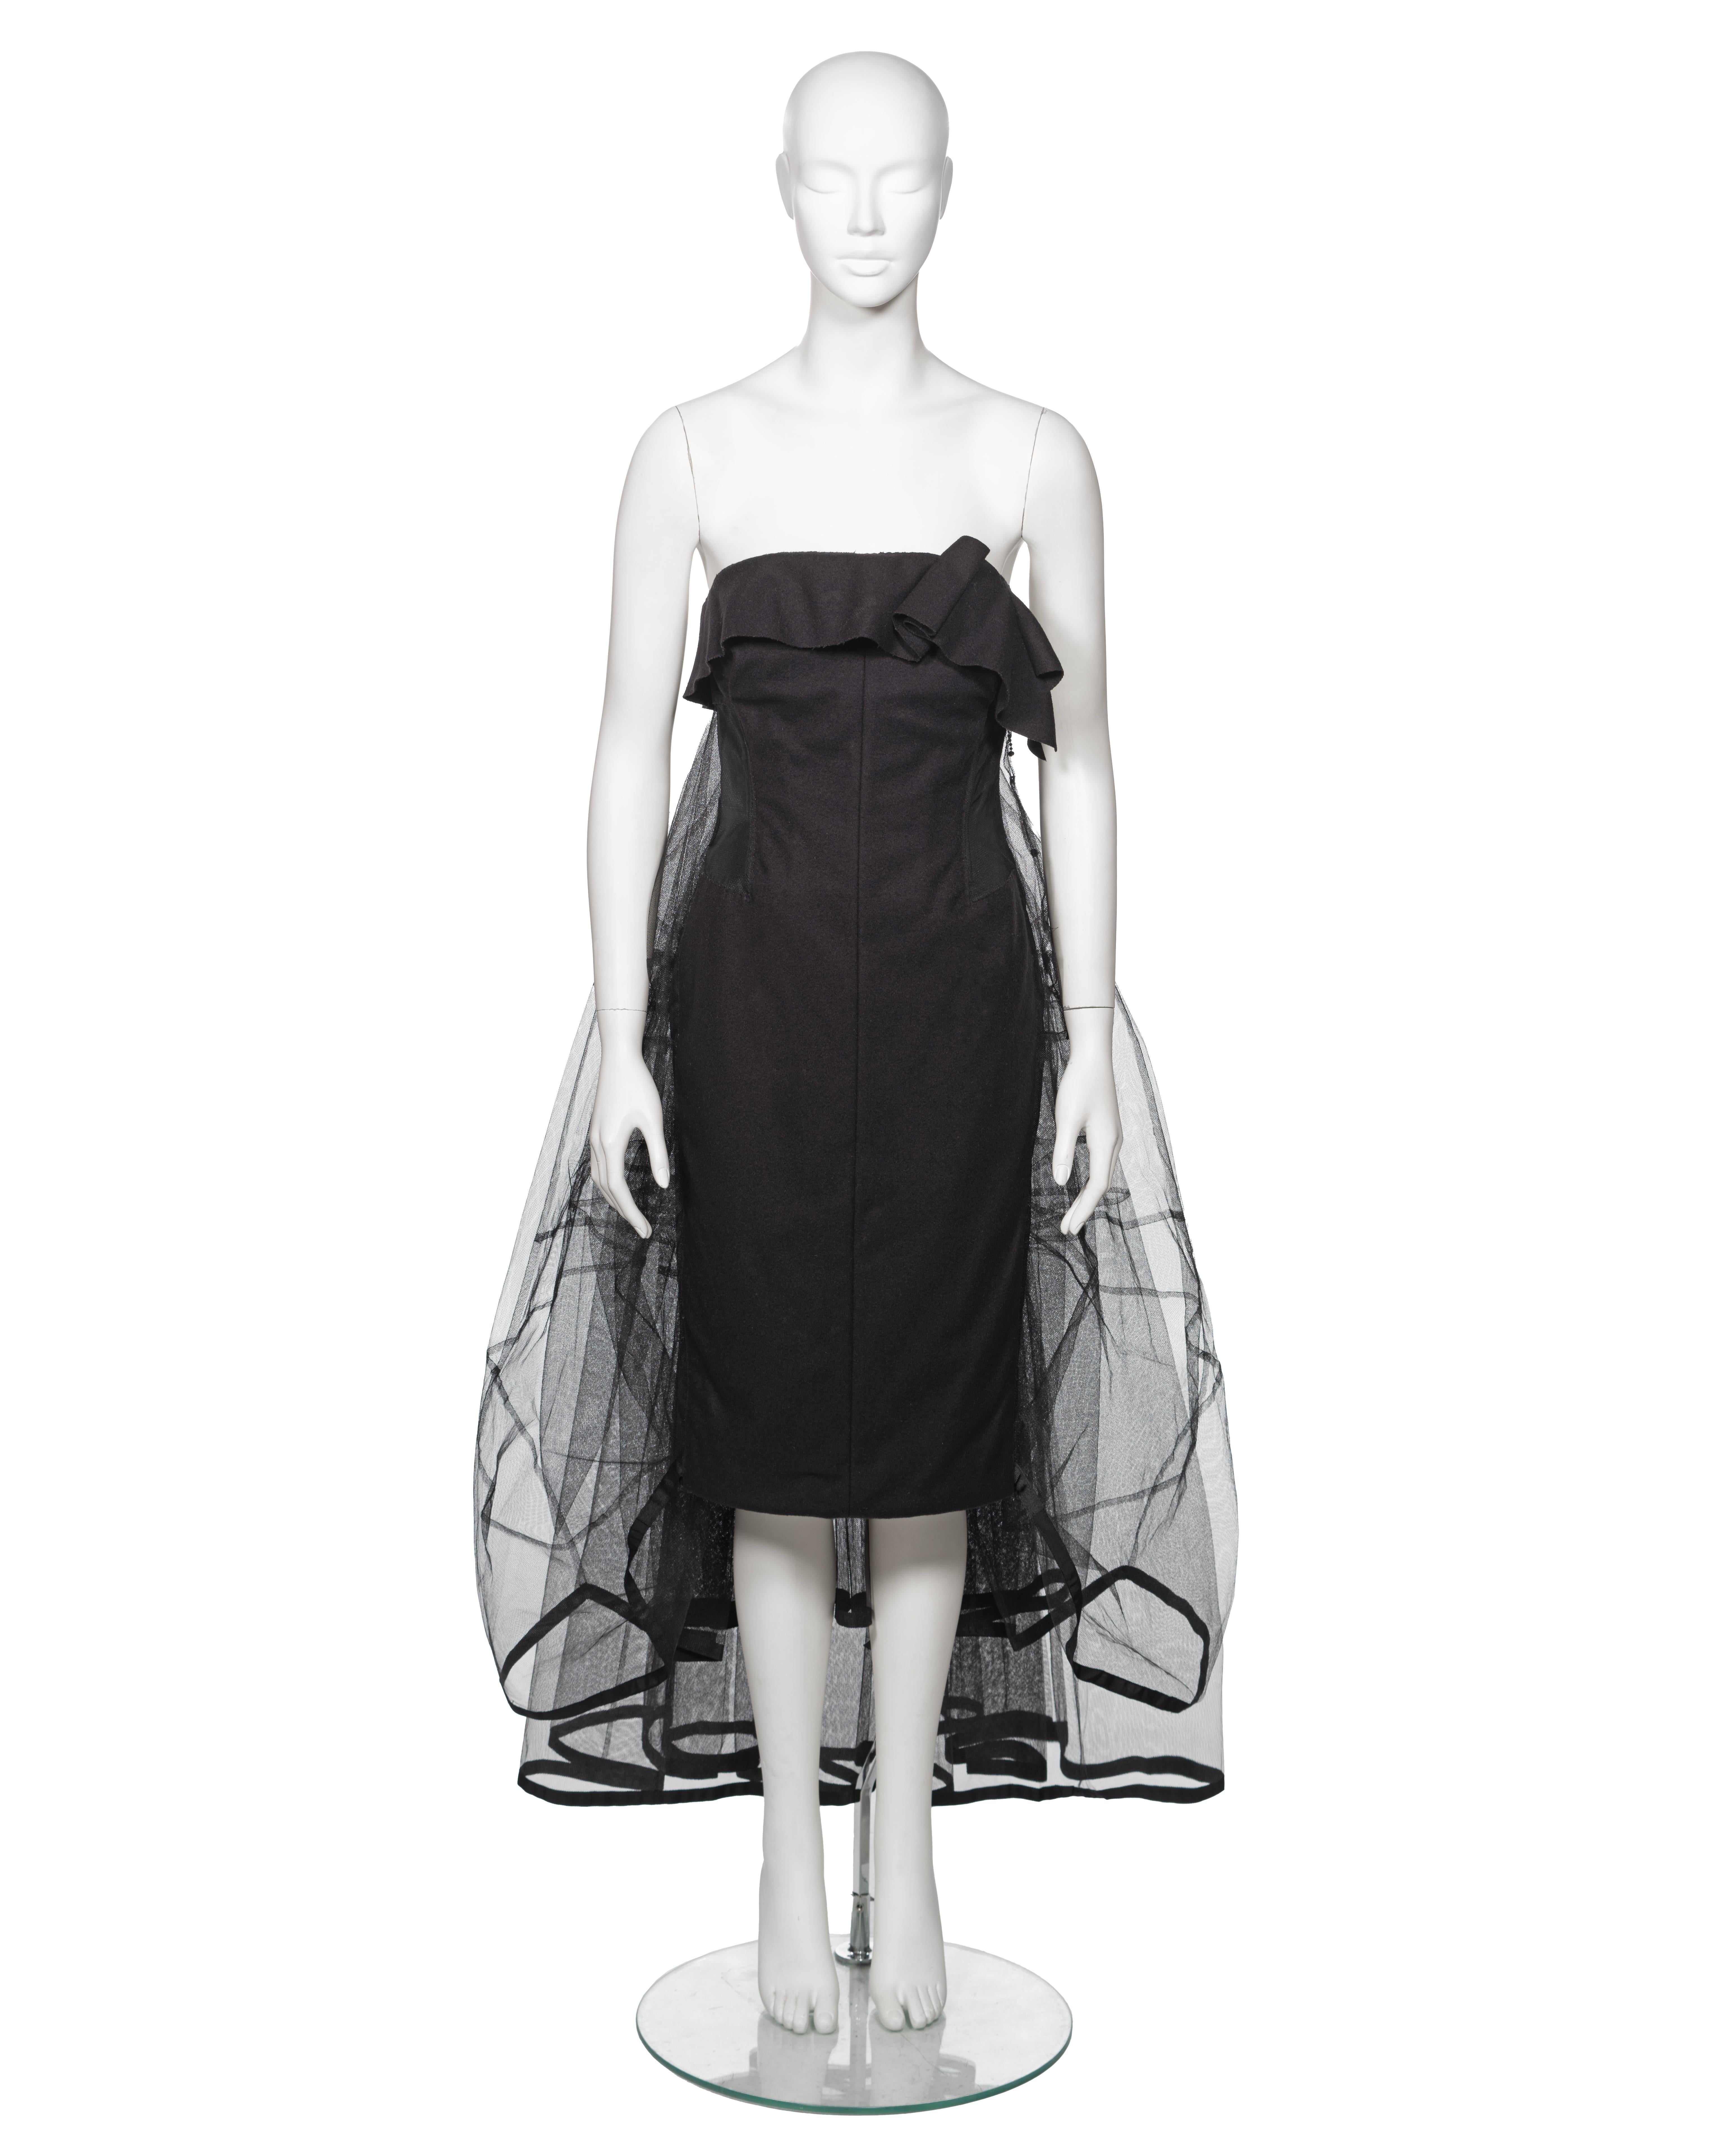 ▪ Louis Vuitton Black Wool Strapless Evening Dress
▪ Creative Director: Marc Jacobs
▪ Fall-Winter 2008
▪ Sold by One of a Kind Archive
▪ Crafted from black felted wool, this garment exudes elegance and sophistication
▪ Boasting a built-in corset,